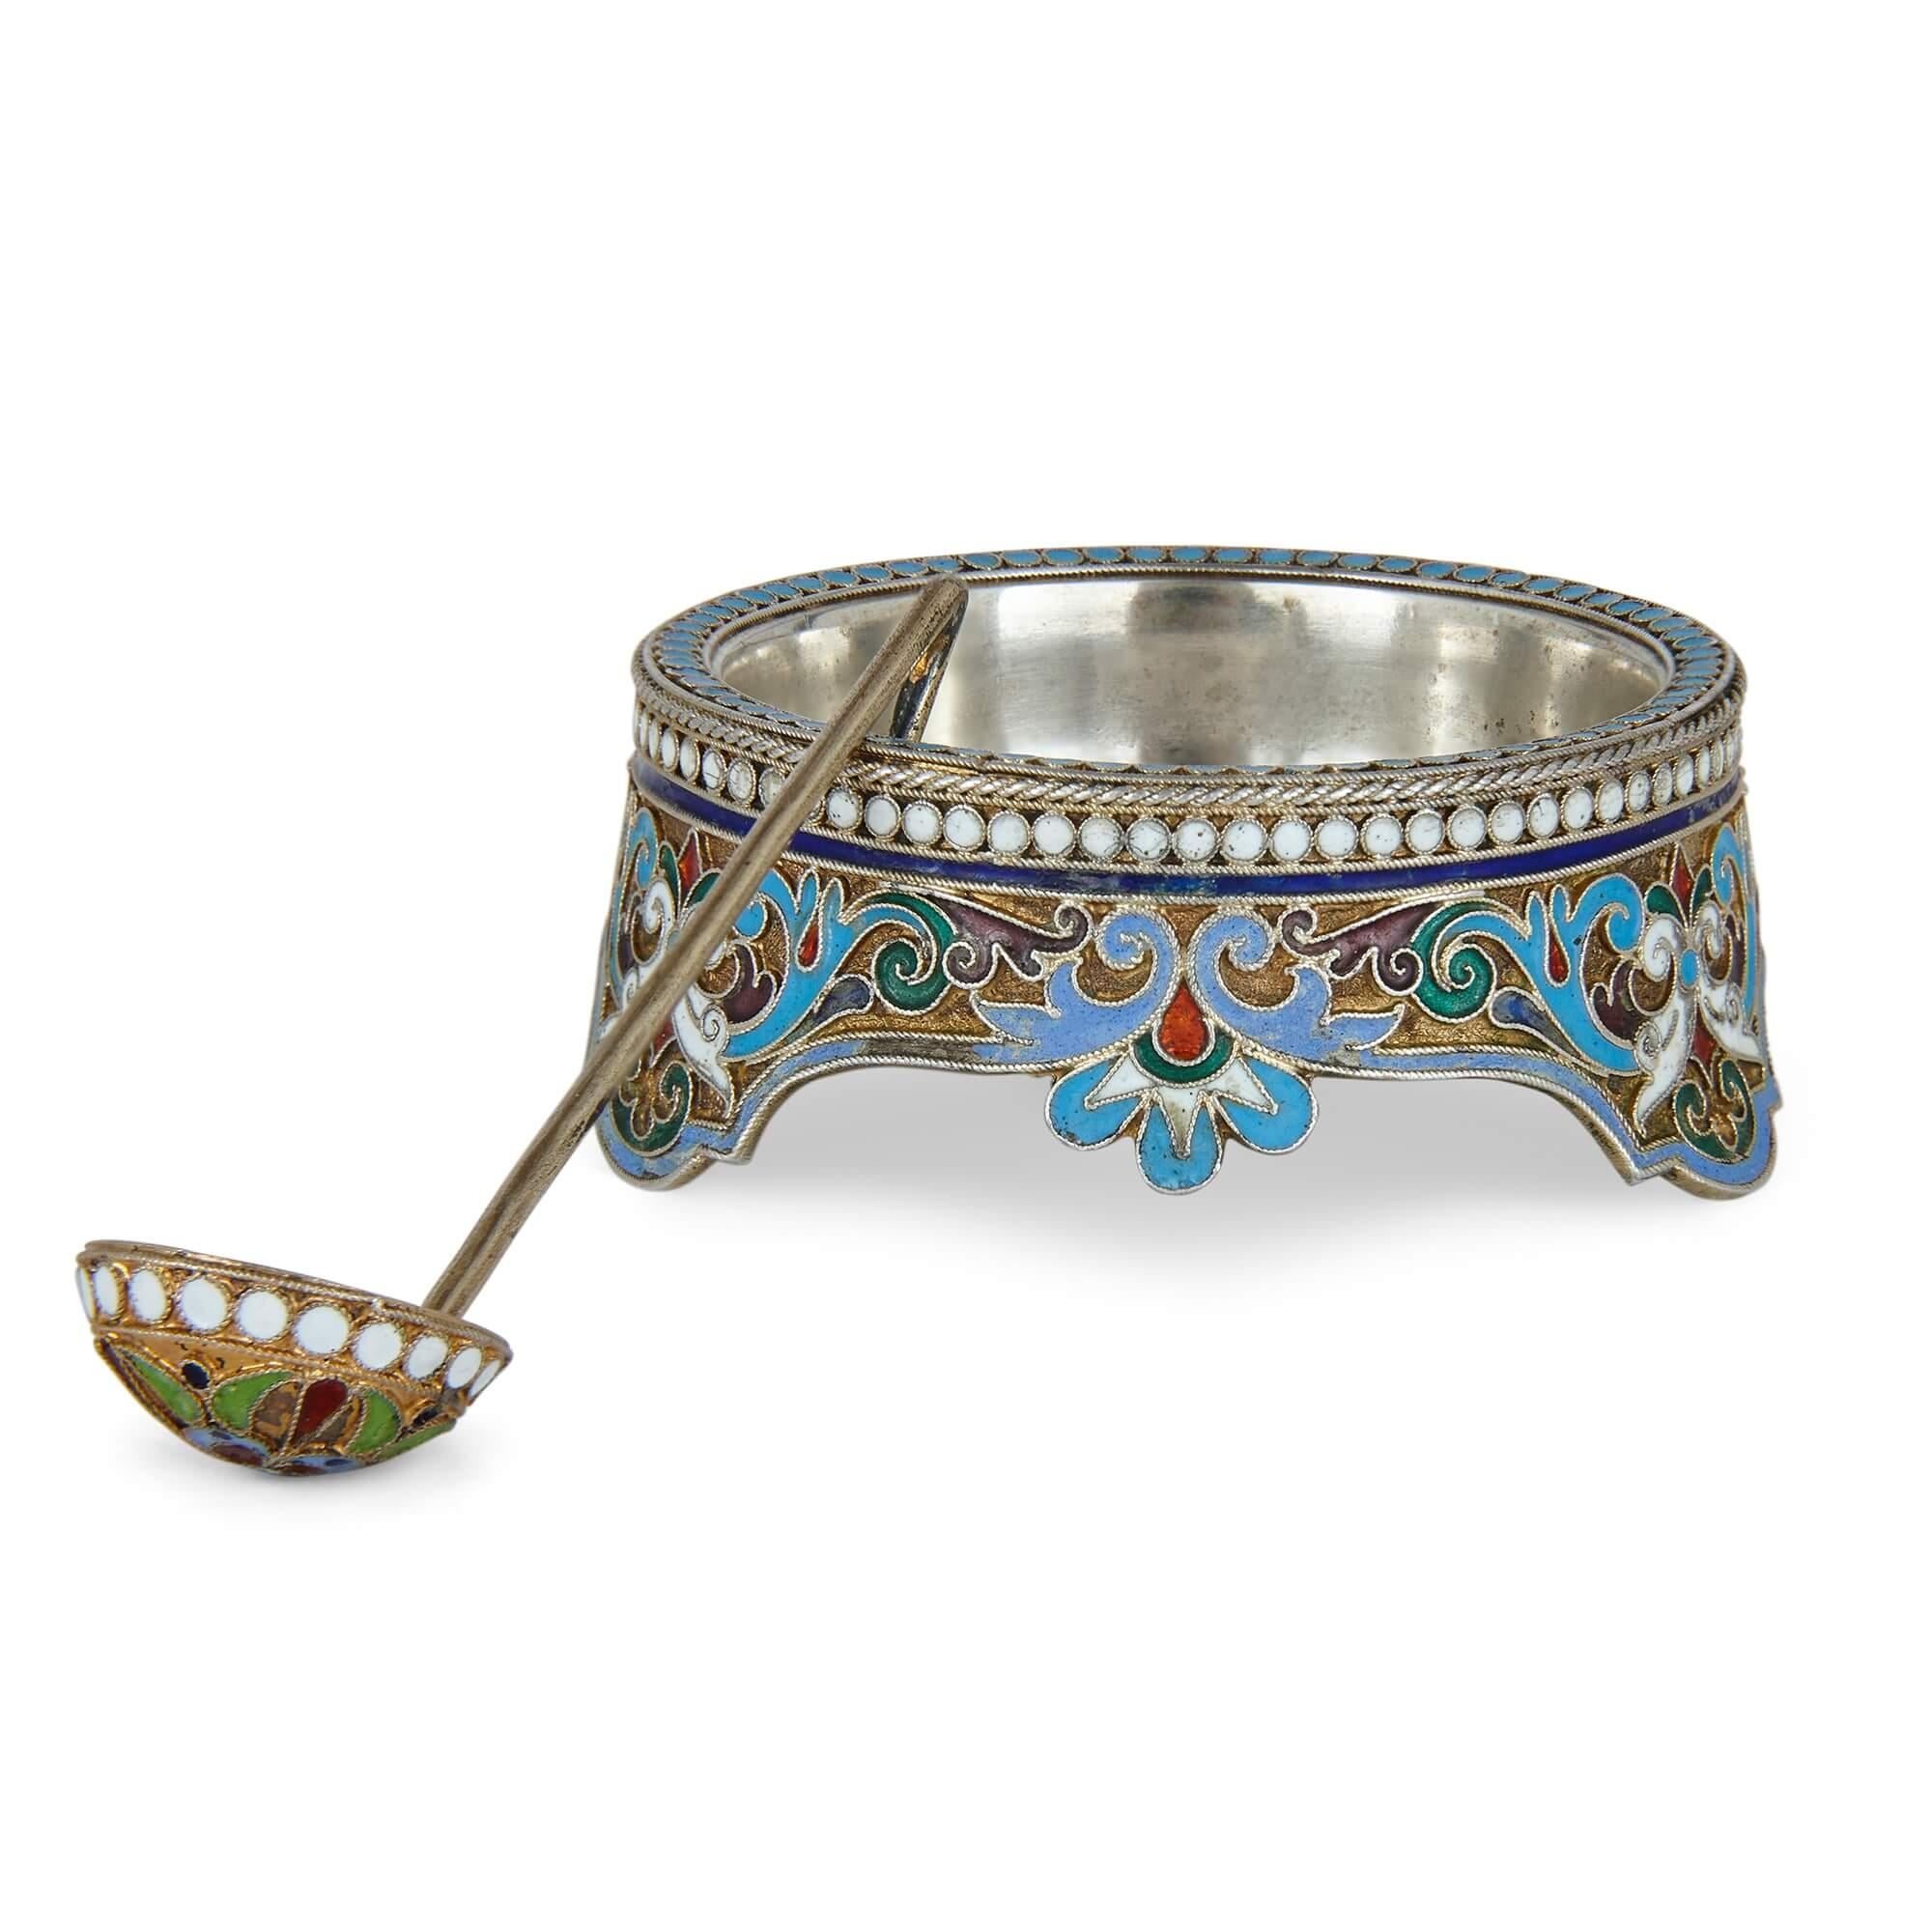 A Russian silver-gilt and cloisonné enamel open salt and spoon
Moscow, Late 19th Century
2cm high x 5.5cm diameter

Beautifully ornate and superbly executed this charming and elegant salt and spoon was made in Moscow towards the end of the